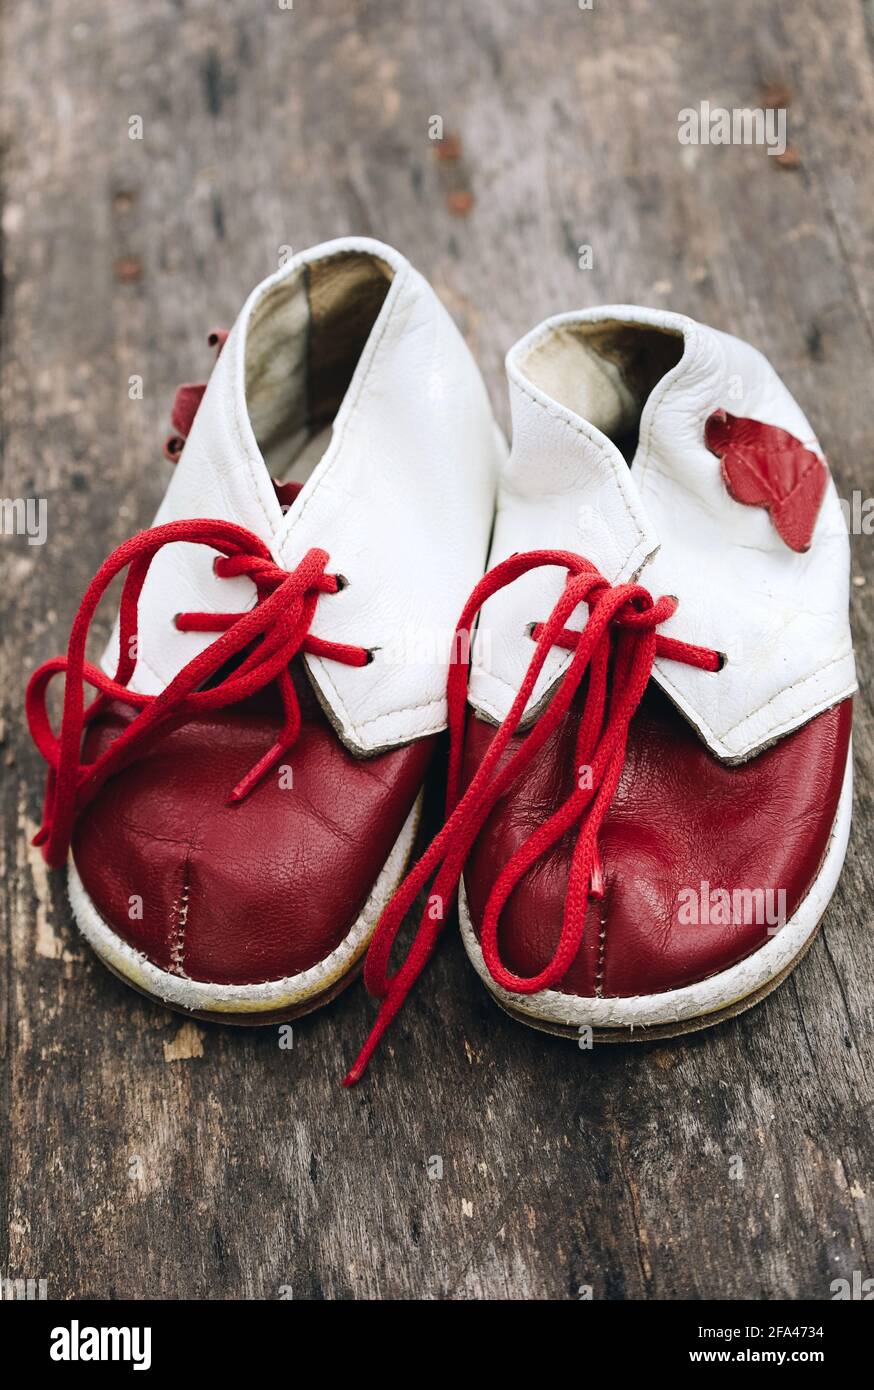 Cute leather red and white baby boots with laces, vintage retro fashion, first foot wear for child on wooden background Stock Photo